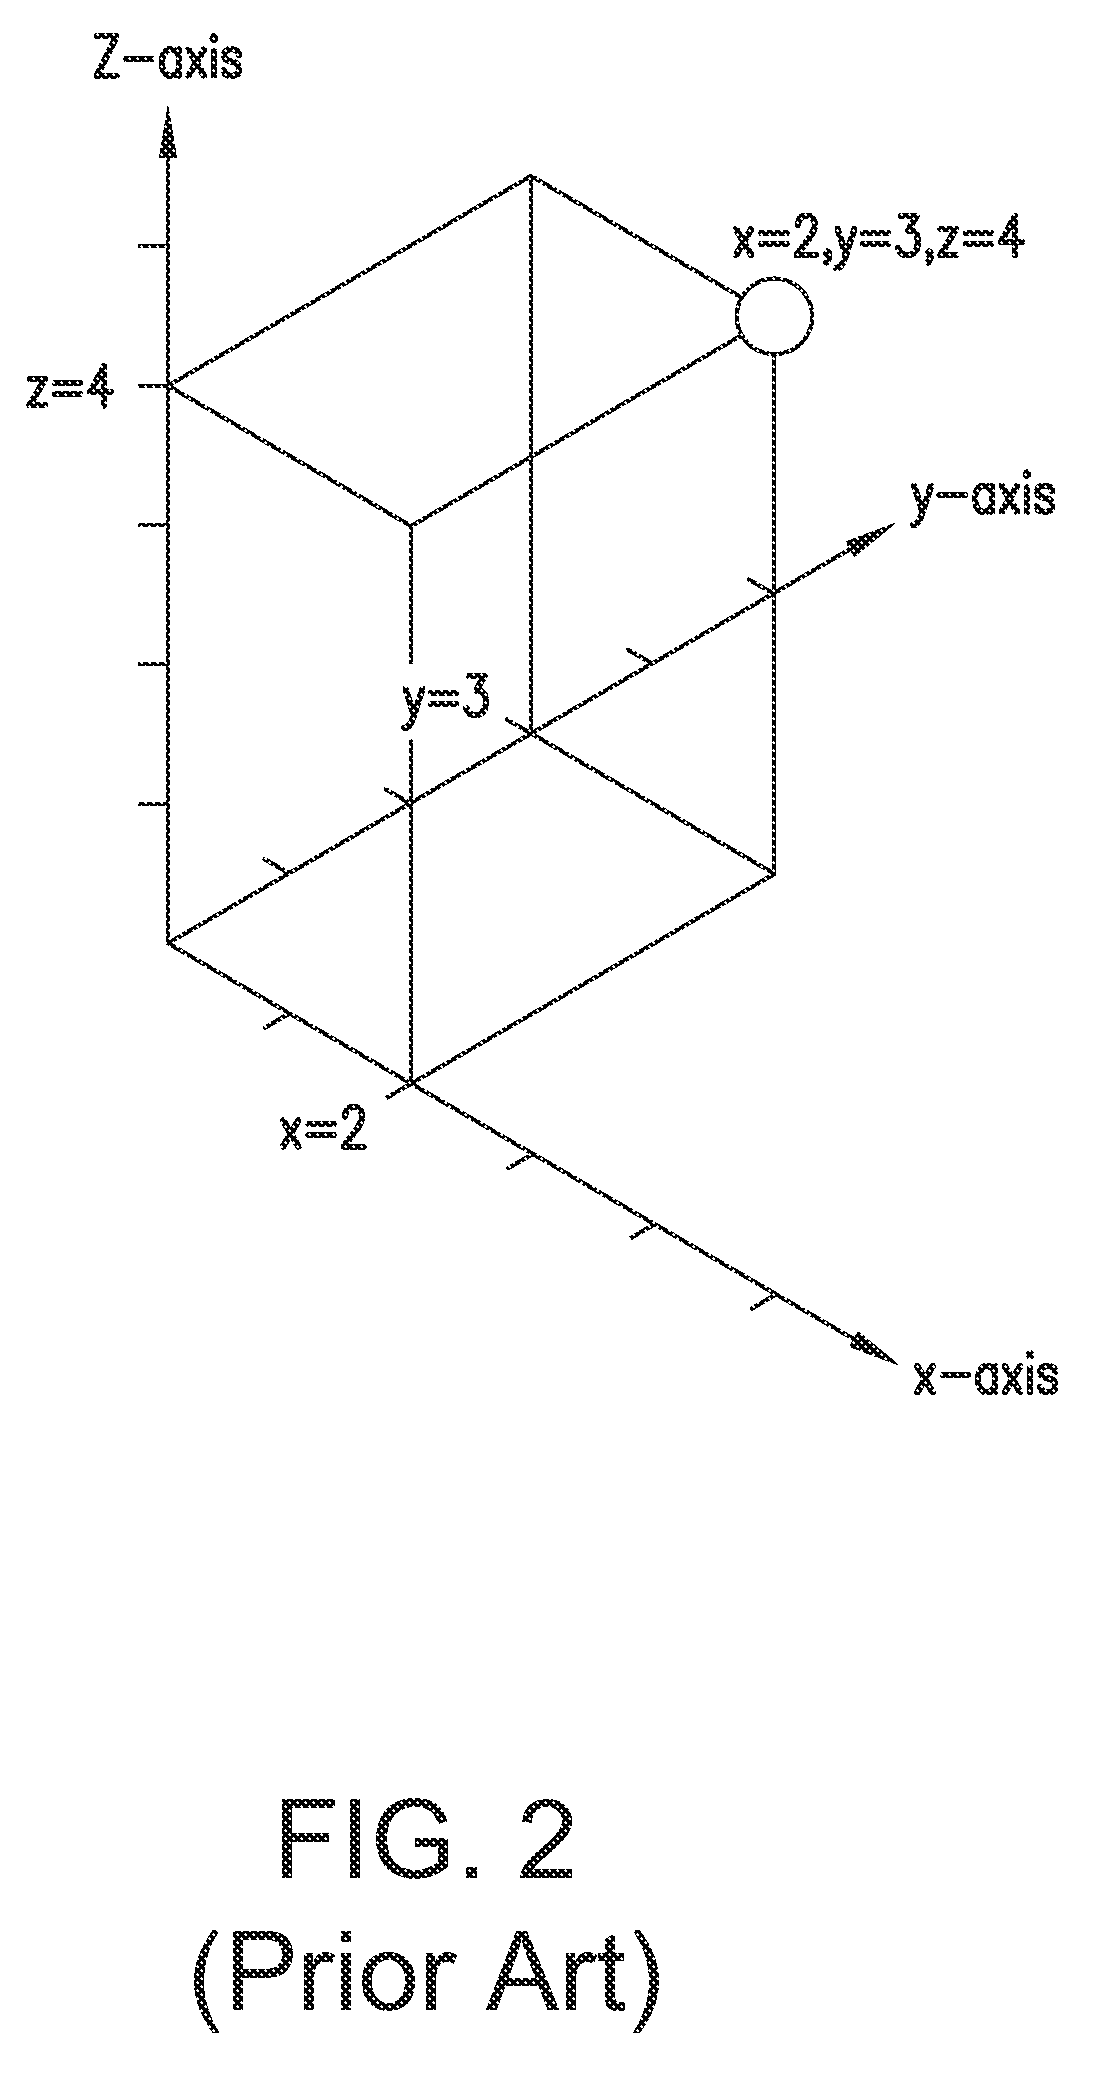 Domain-specific syntax tagging in a functional information system